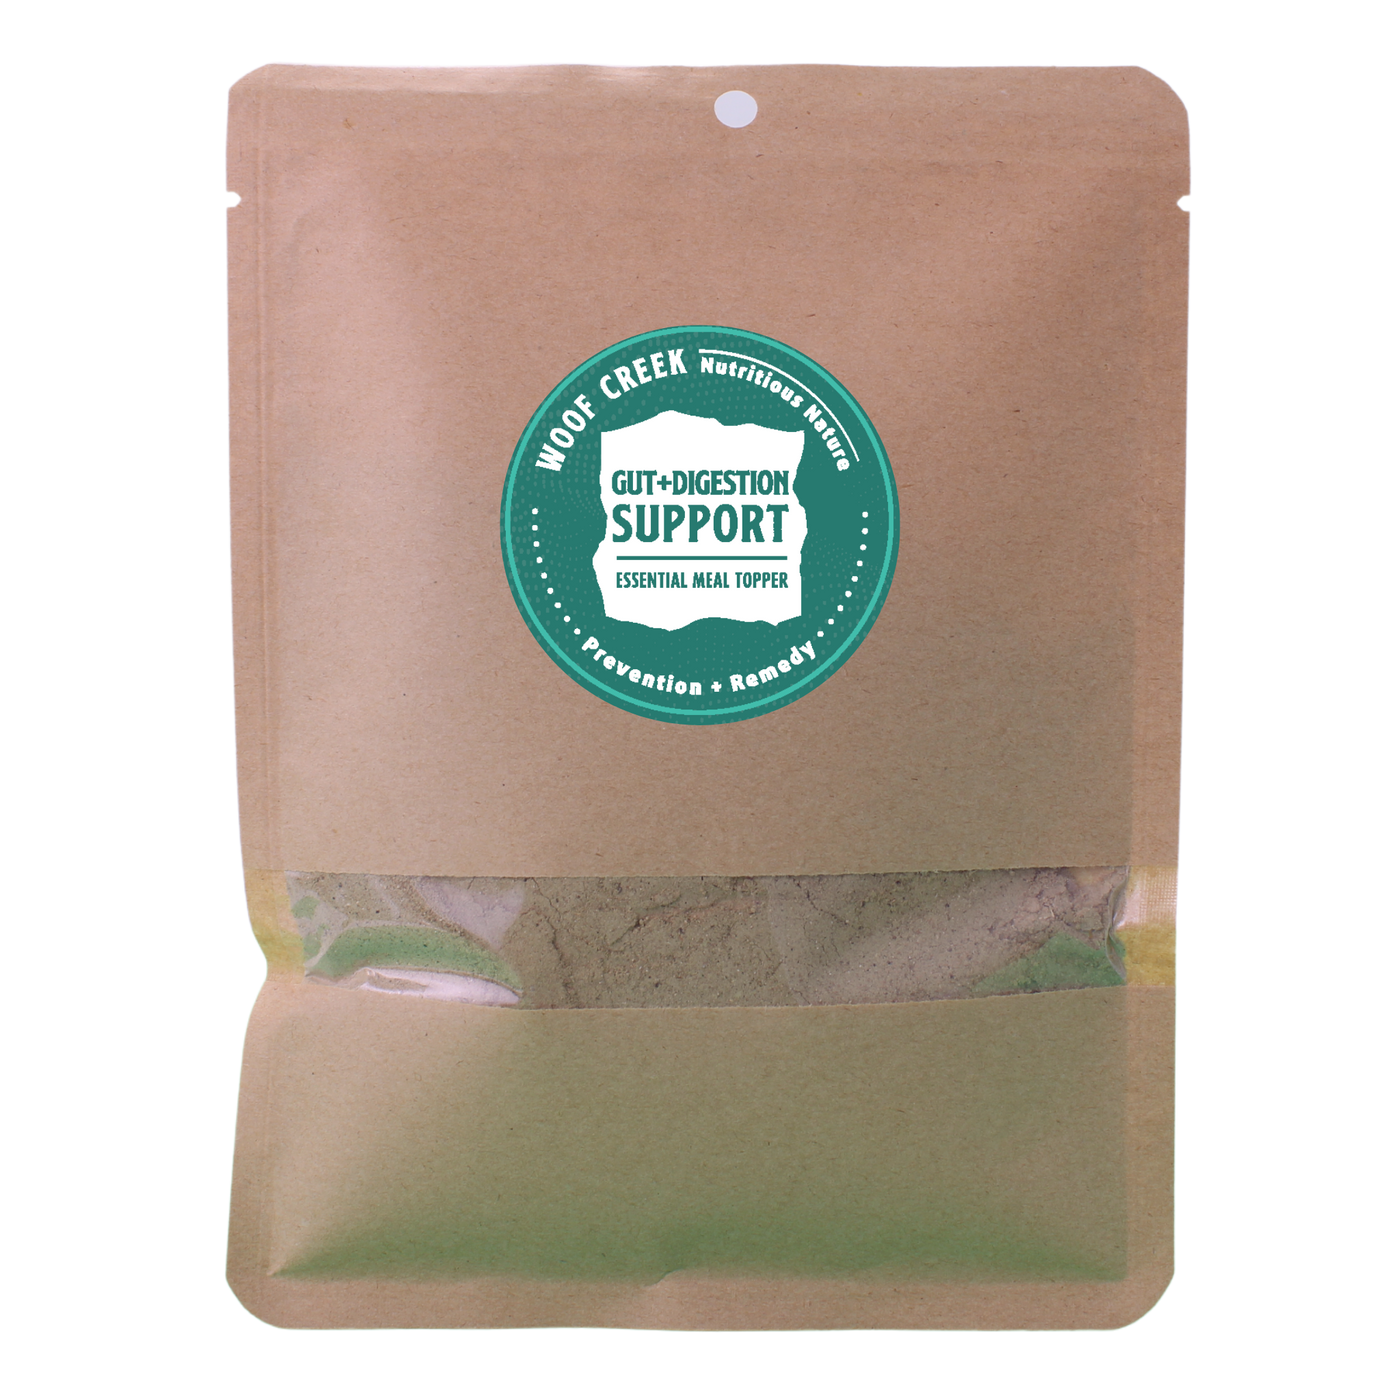 Essential Gut + Digestion Support Meal Topper Refill Pouch | Subscribe & Save - Woof Creek Dog Wellness